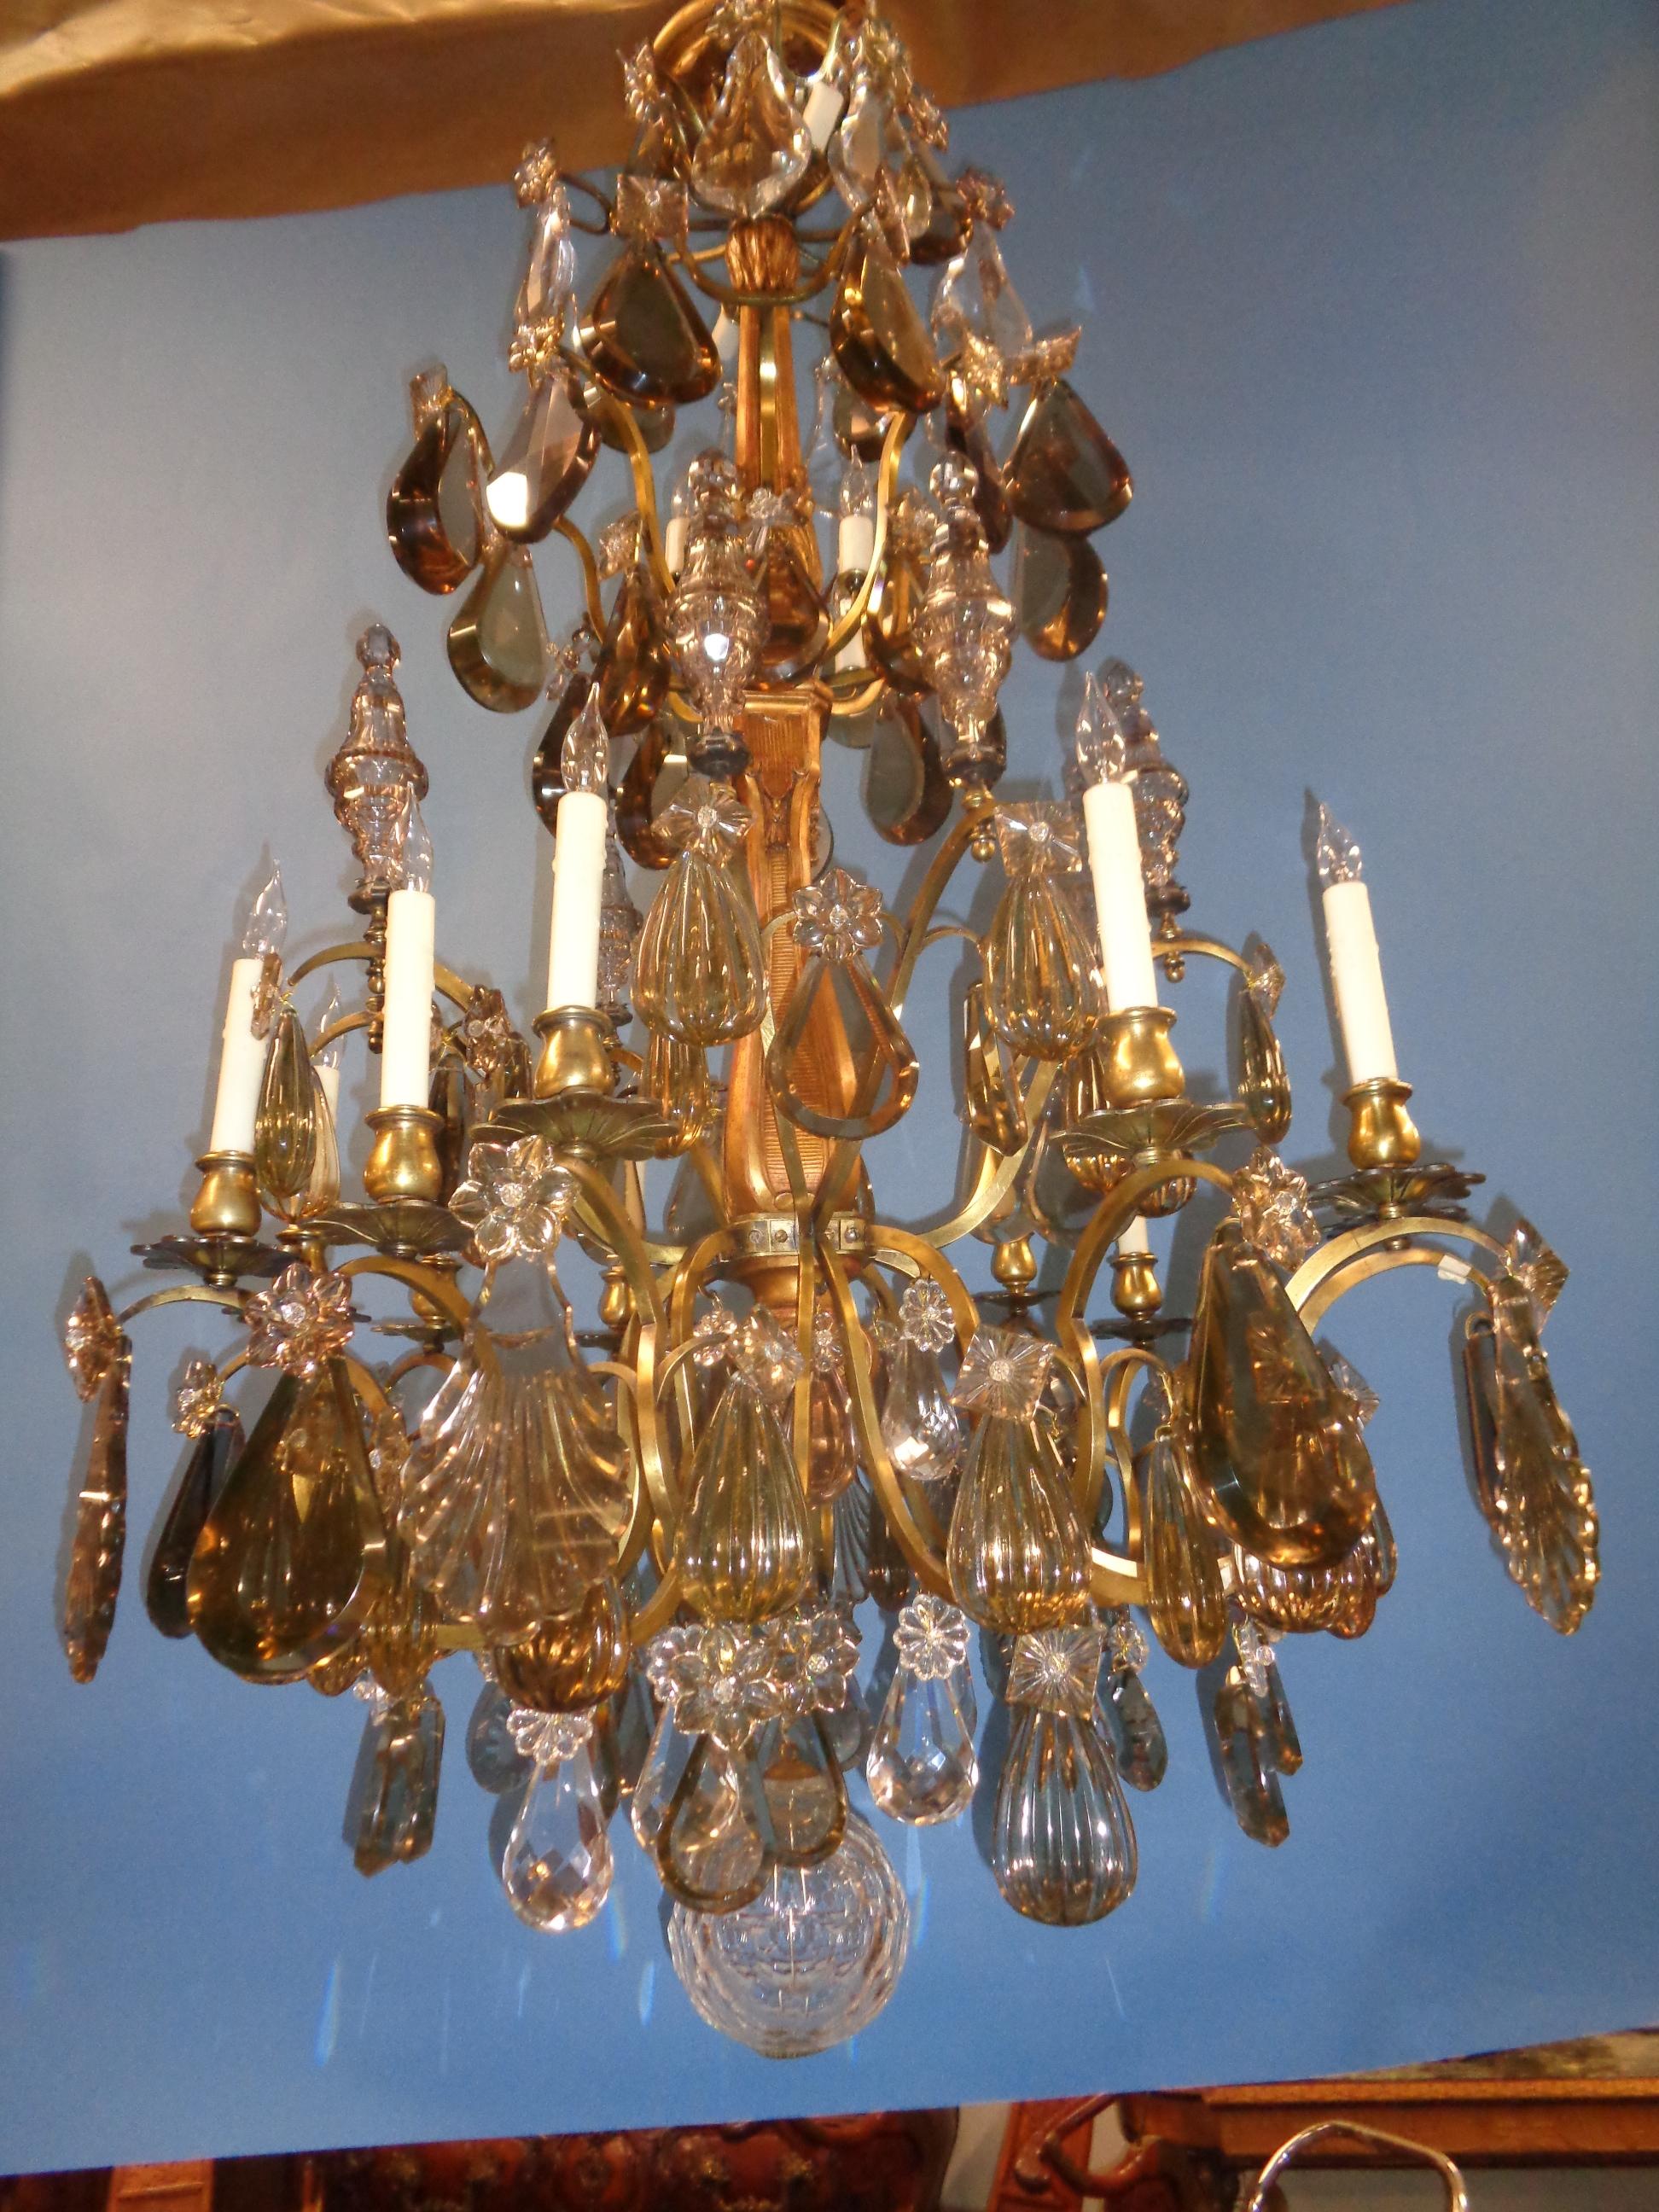 This beautiful one of a kind Saint Louis crystal chandelier has a carved and gold gilt center column with bronze and brass arms supporting multi-shaped and faceted crystals. There are six amethyst colored poignards, 12 candlelights and two tiers of